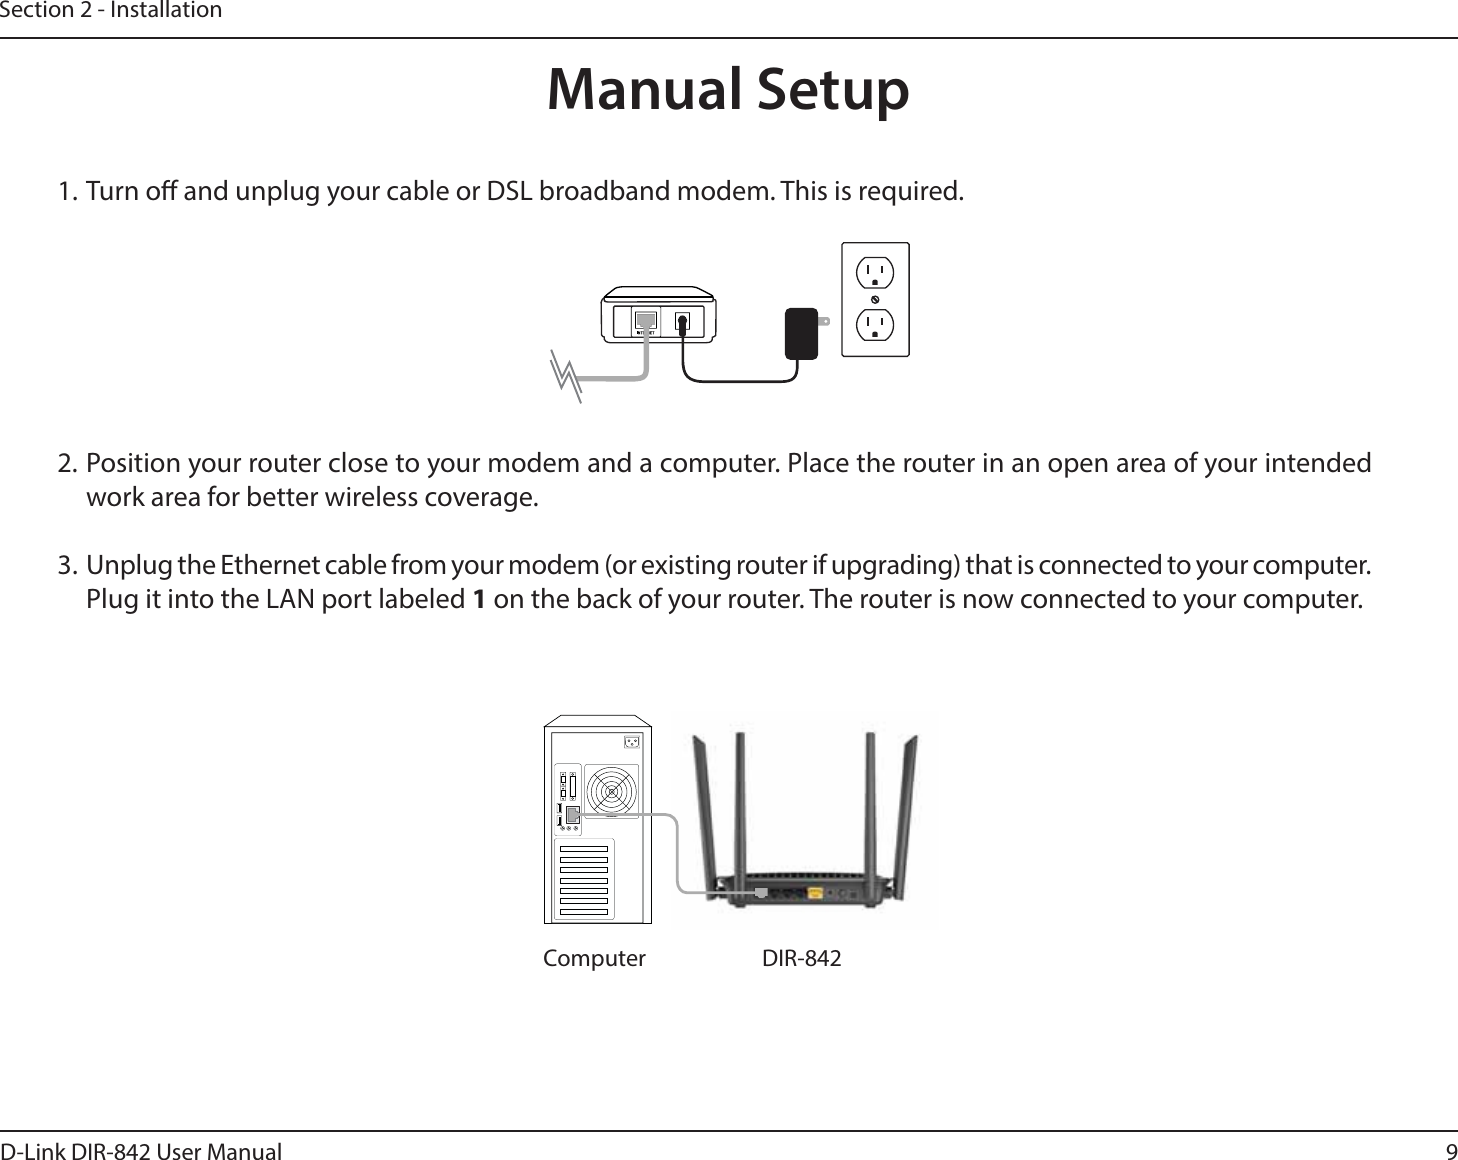 9D-Link DIR-842 User ManualSection 2 - Installation1. Turn o and unplug your cable or DSL broadband modem. This is required.2. Position your router close to your modem and a computer. Place the router in an open area of your intended work area for better wireless coverage.6OQMVHUIF&amp;UIFSOFUDBCMFGSPNZPVSNPEFNPSFYJTUJOHSPVUFSJGVQHSBEJOHUIBUJTDPOOFDUFEUPZPVSDPNQVUFSPlug it into the LAN port labeled 1 on the back of your router. The router is now connected to your computer.Manual Setup4Computer DIR-842